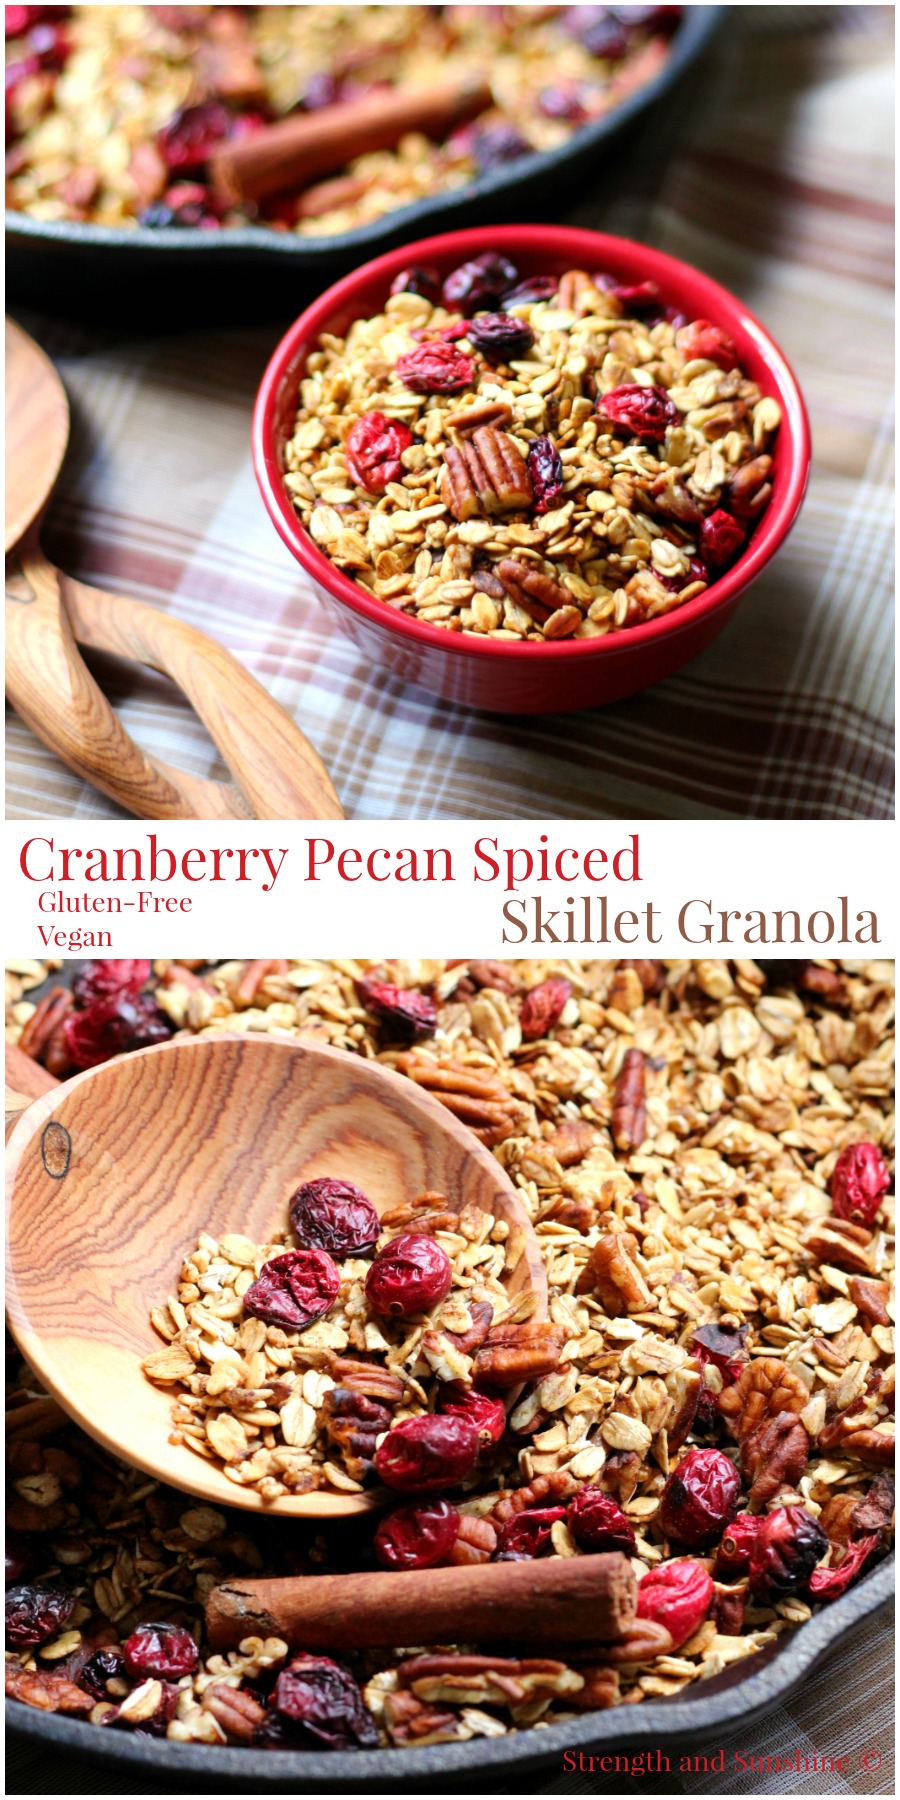 Cranberry Pecan Spiced Skillet Granola | Strength and Sunshine @RebeccaGF666 Bring the scents of cozy warmth and cheer to you home by making this stove-top cranberry pecan spicy skillet granola. Gluten-free and vegan, the perfect healthy treat to munch on, morning, noon, or night! Makes a great breakfast, snack, or homemade gift!